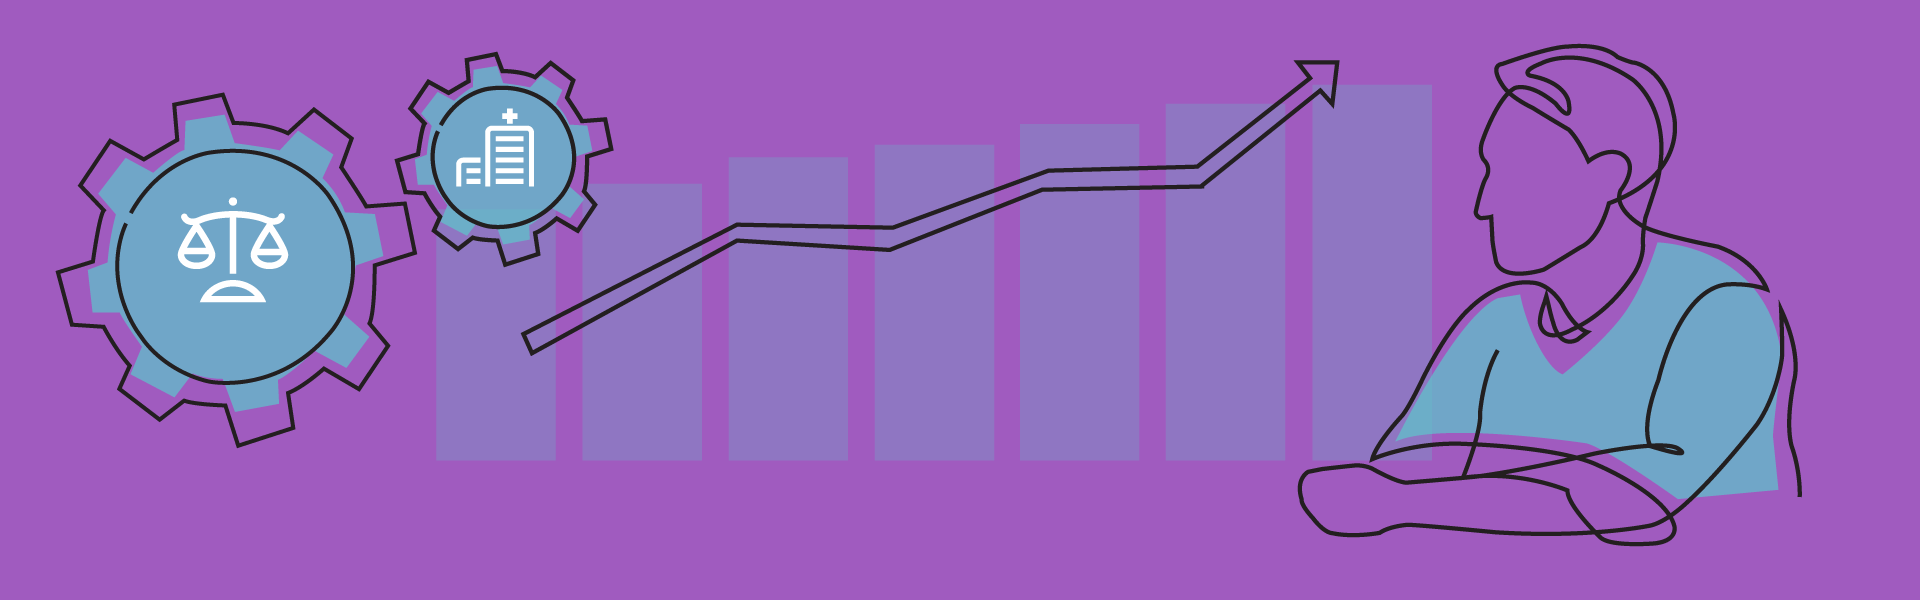 outline drawing of man over bar chart showing increase with balanced scales for equity